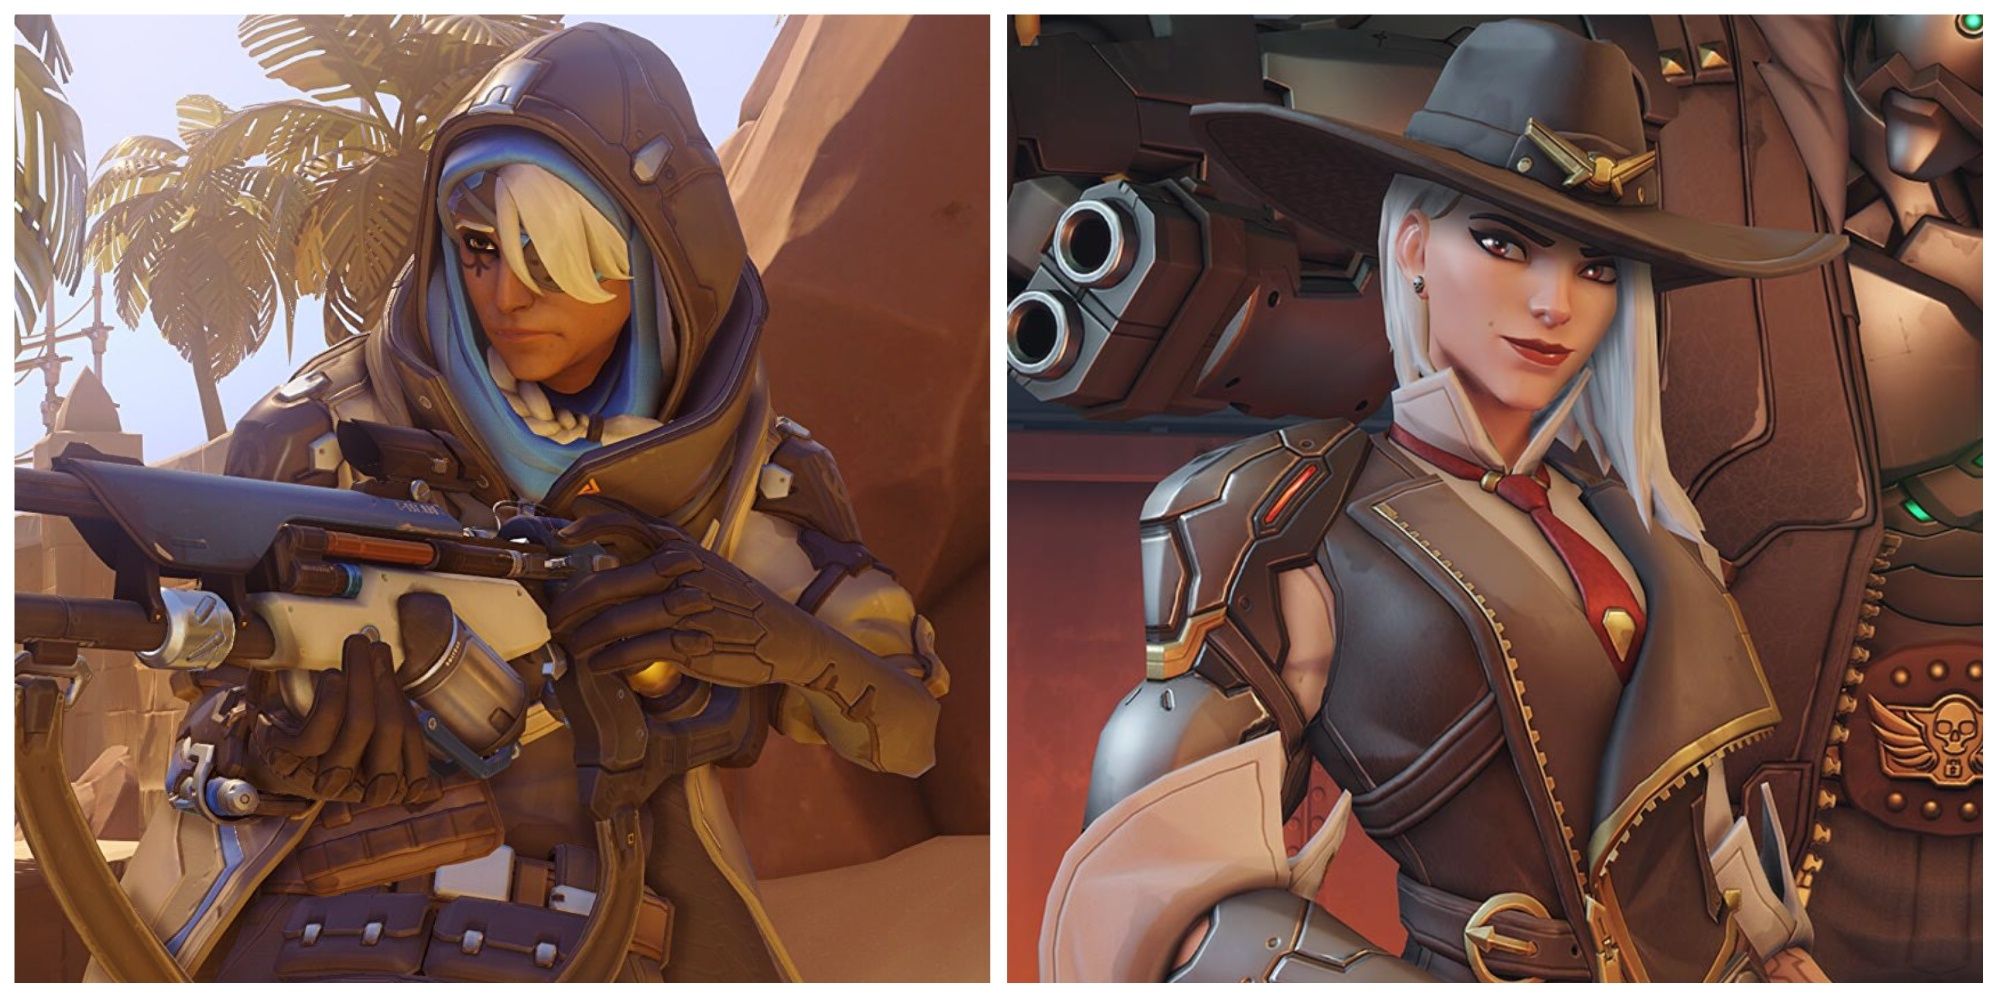 Overwatch 2 screenshot of characters Ana (left) and Ashe (right)